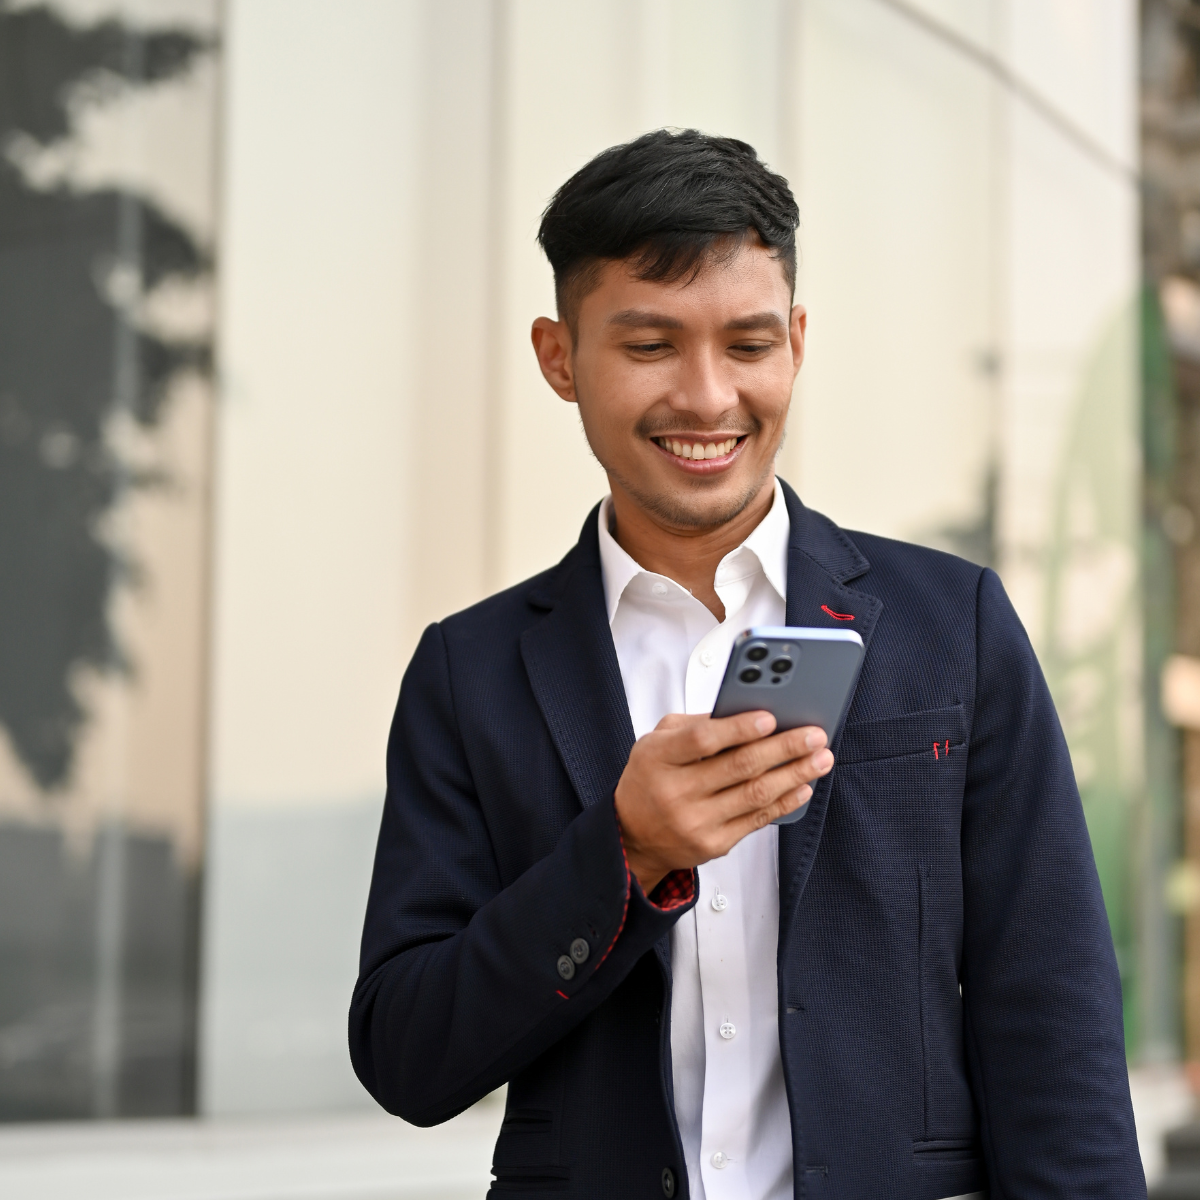 young man on phone in street, smiling at his device